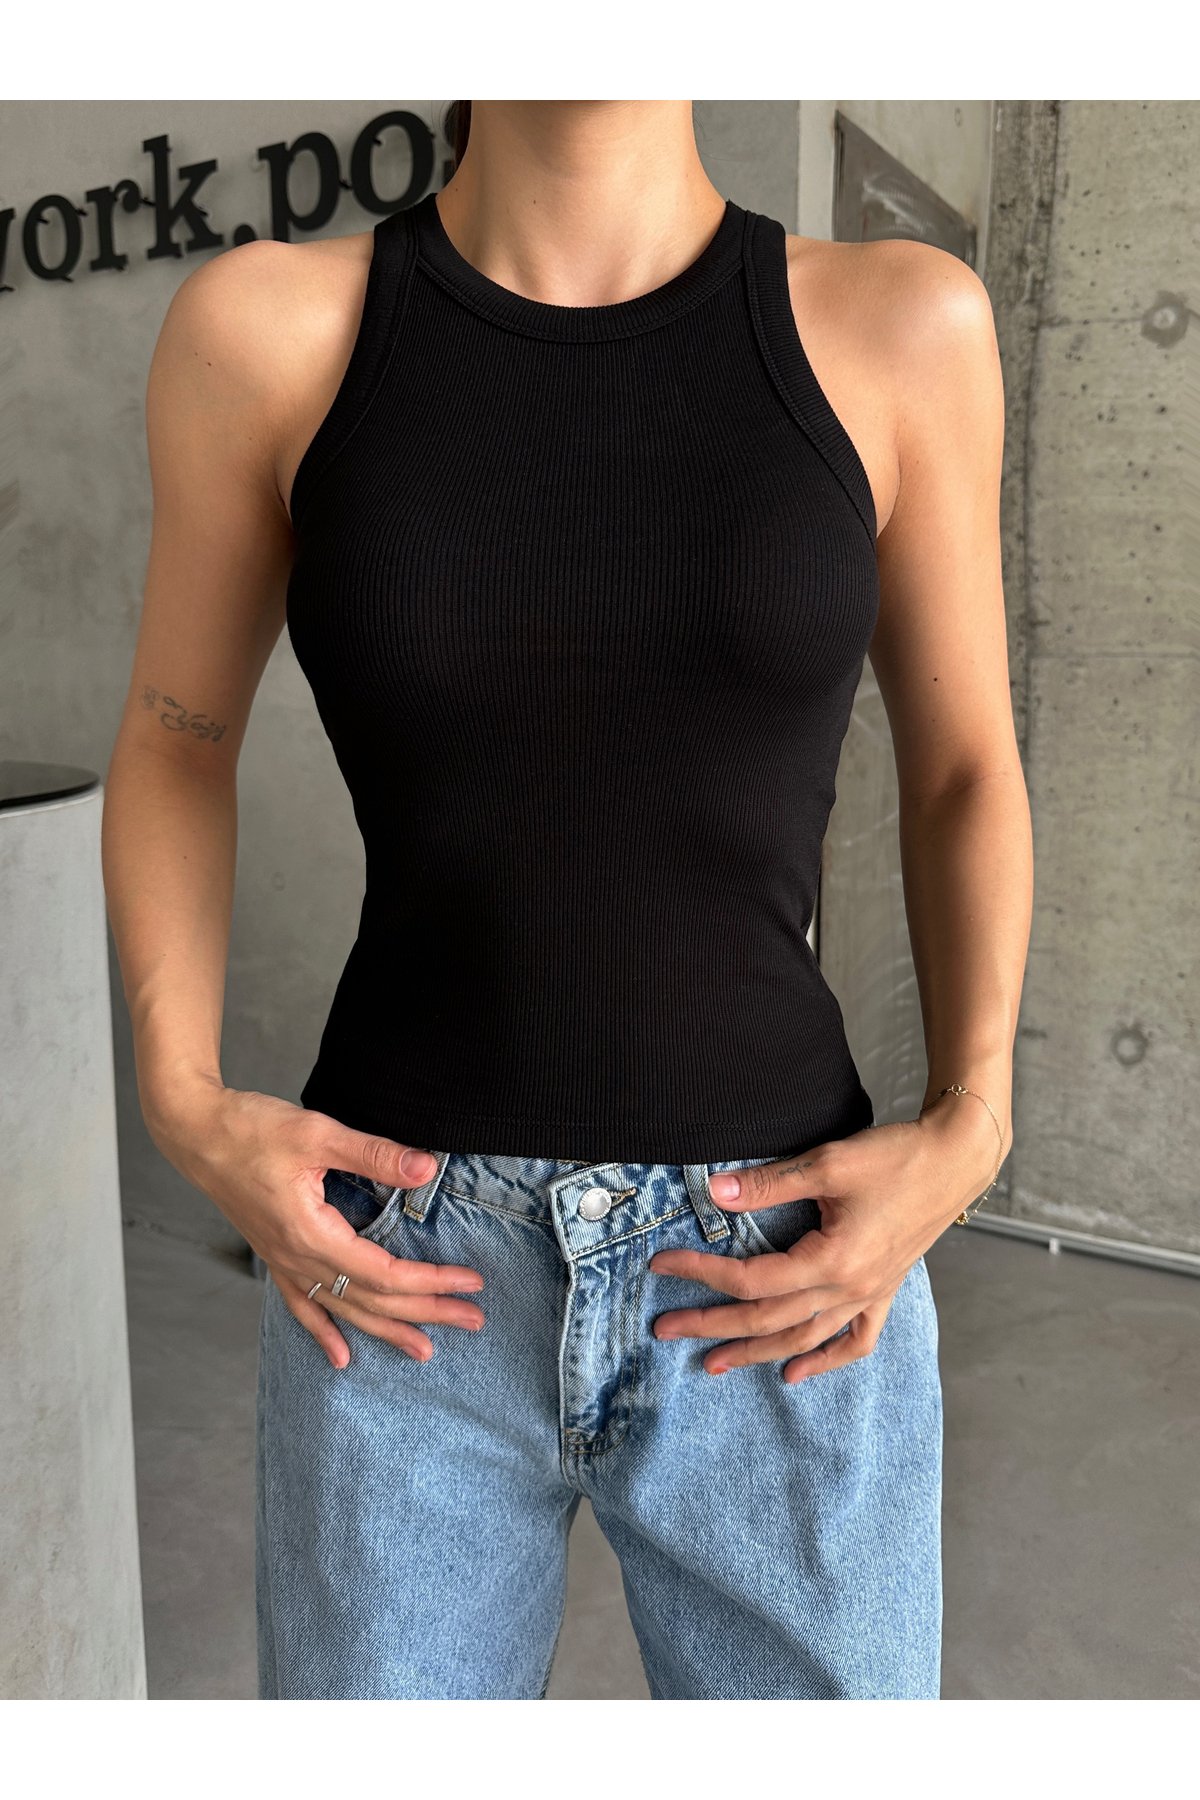 Laluvia Black Thick Tapered Halter Neck Long Undershirt